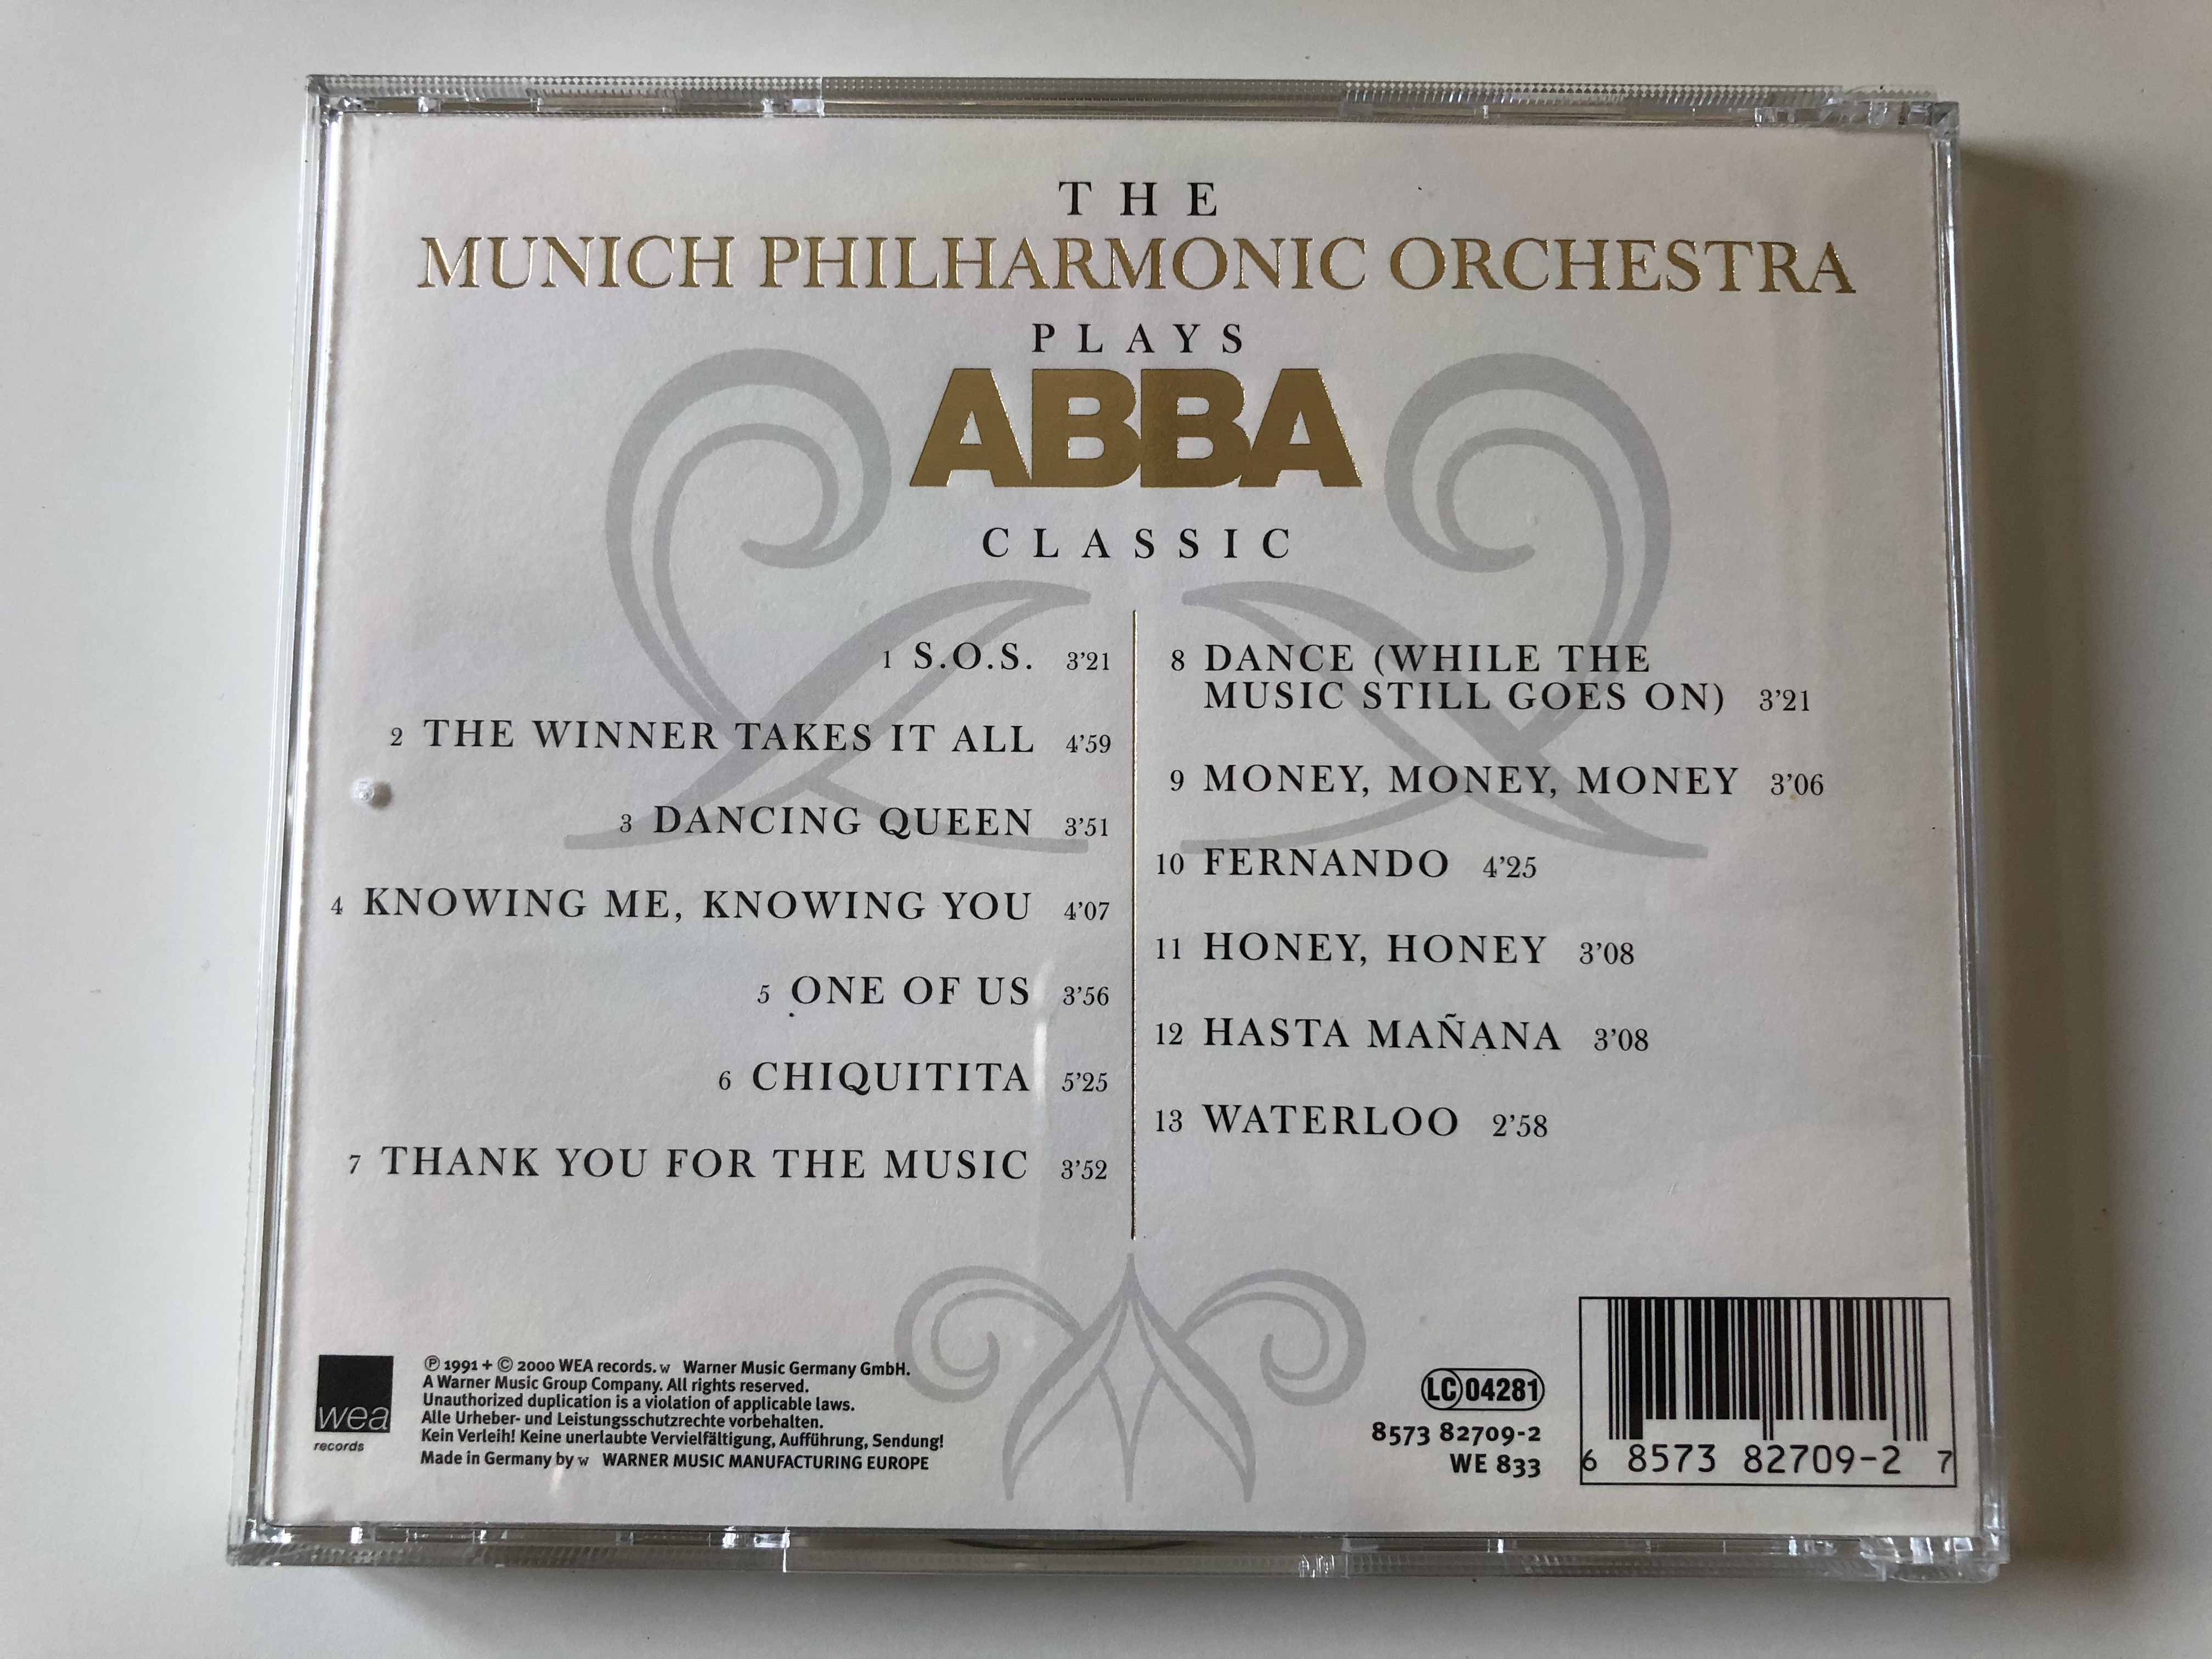 the-munich-philharmonic-orchestra-plays-abba-classic-the-winner-takes-it-all-dancing-queen-one-of-us-fernando-chiquitita-waterloo-thank-you-for-the-music-and-many-more-wea-audio-c-5-.jpg